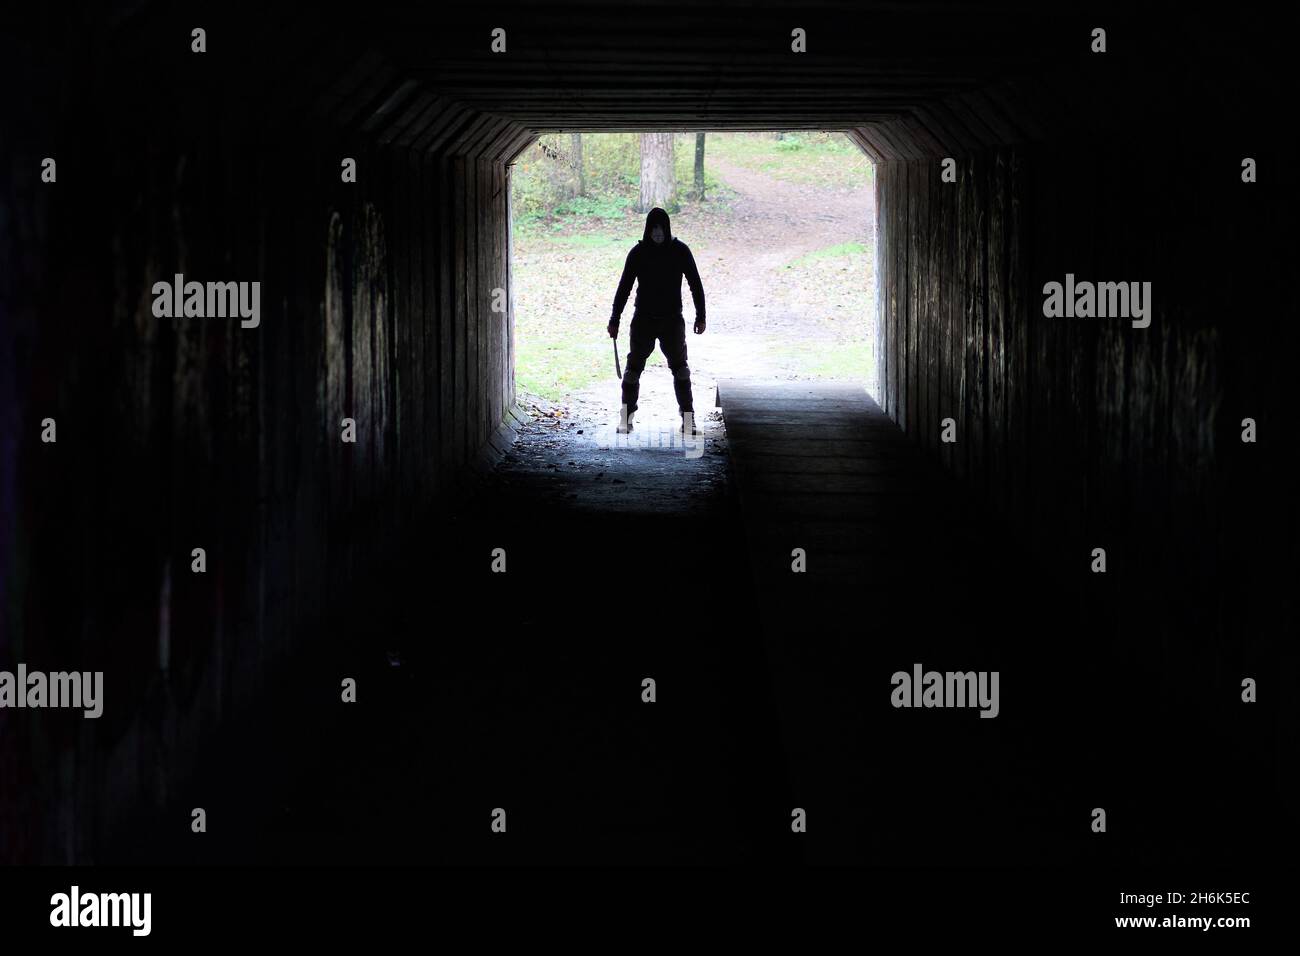 Serial killer Jason Voorhees in hockey mask and machete in the end of the dark tunnel. Friday 13h cosplay costume.  Stock Photo